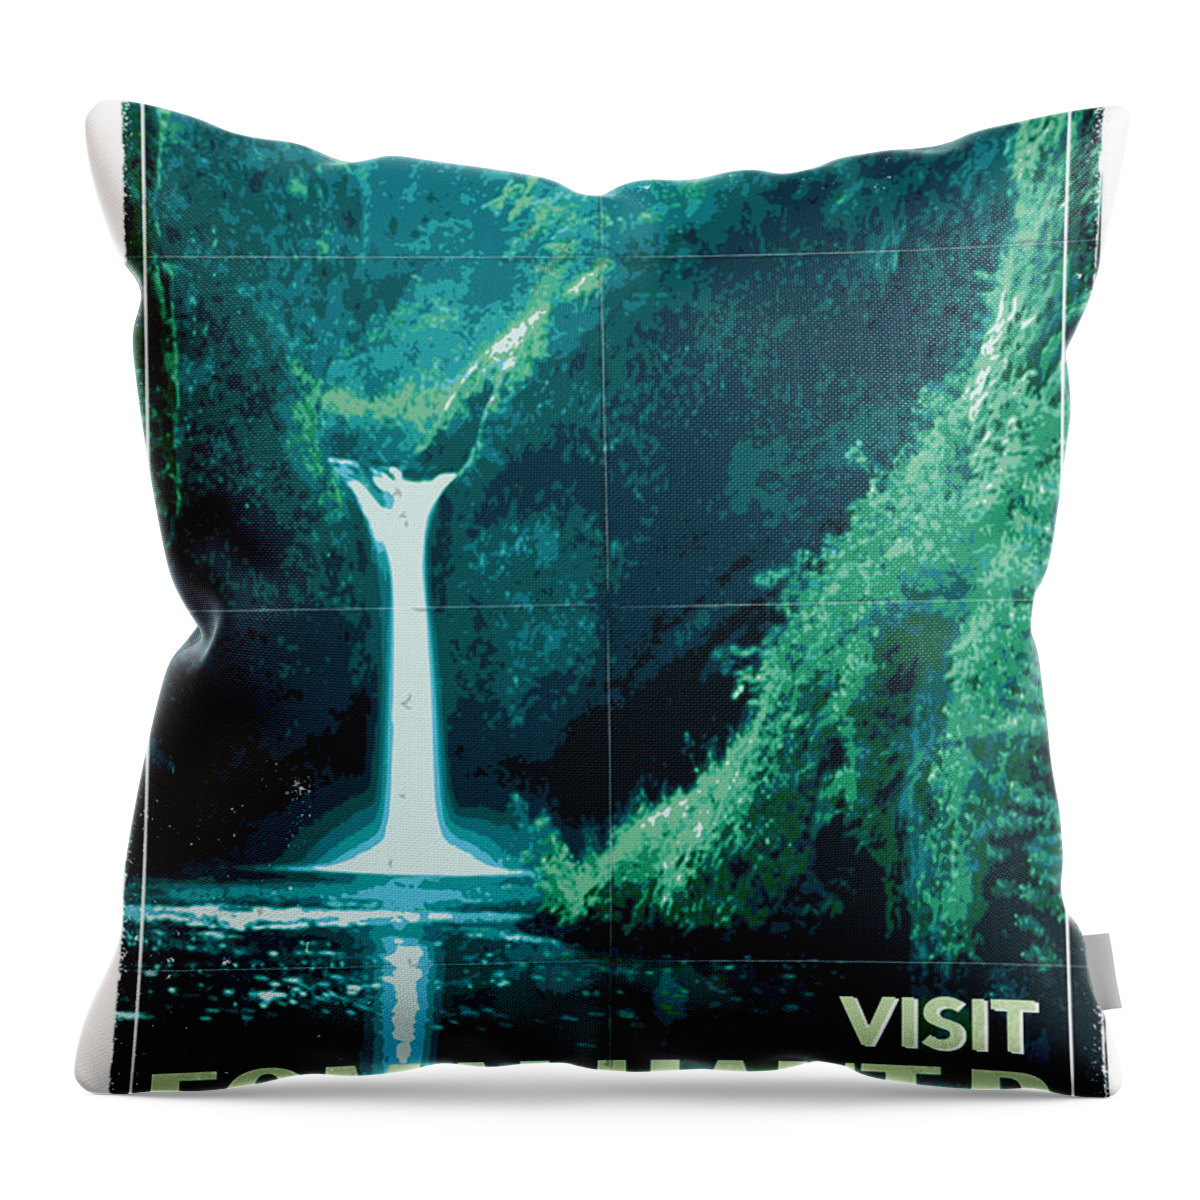 Space Throw Pillow featuring the digital art Exoplanet 04 Travel Poster Fomalhaut b by Chungkong Art